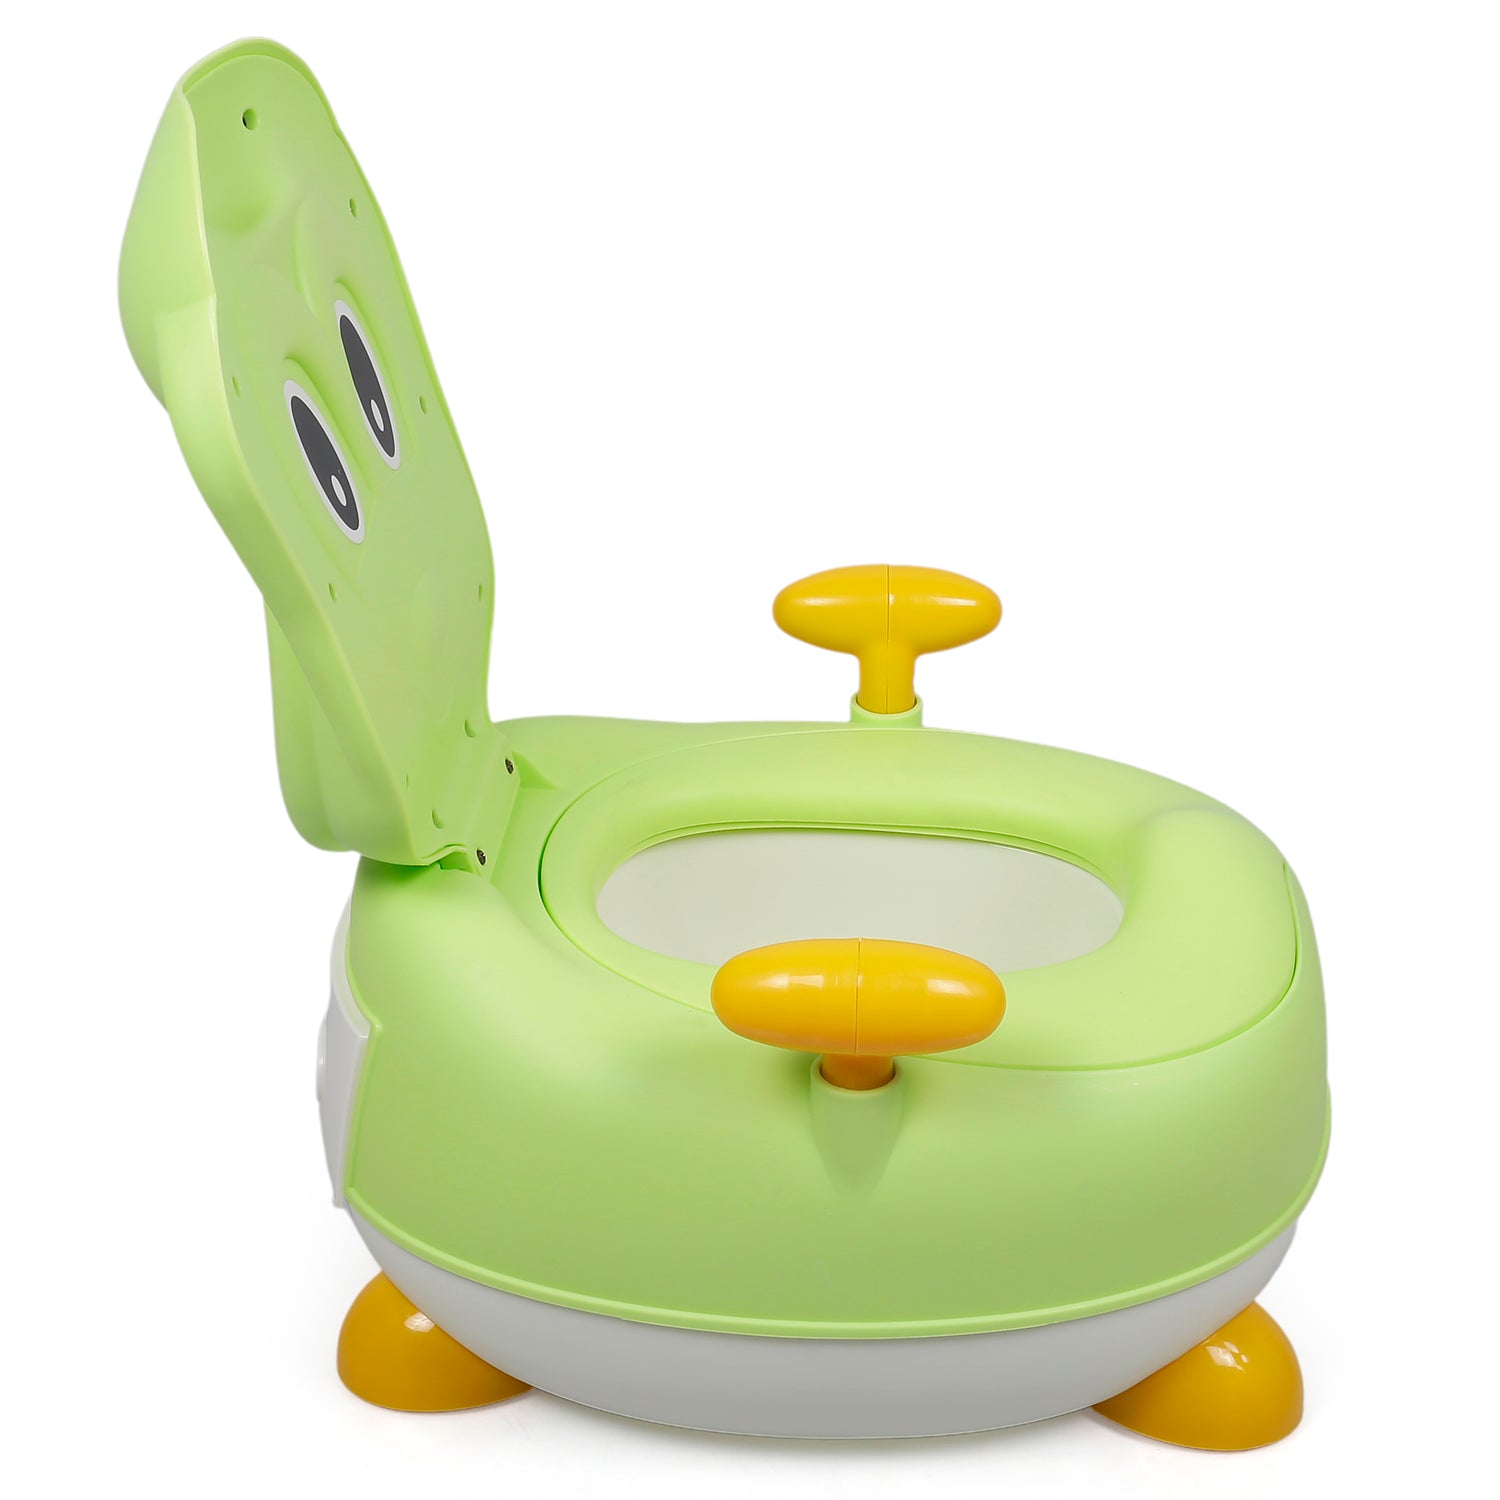 Baby Moo Toilet Training Potty Chair Puppy Shaped Green